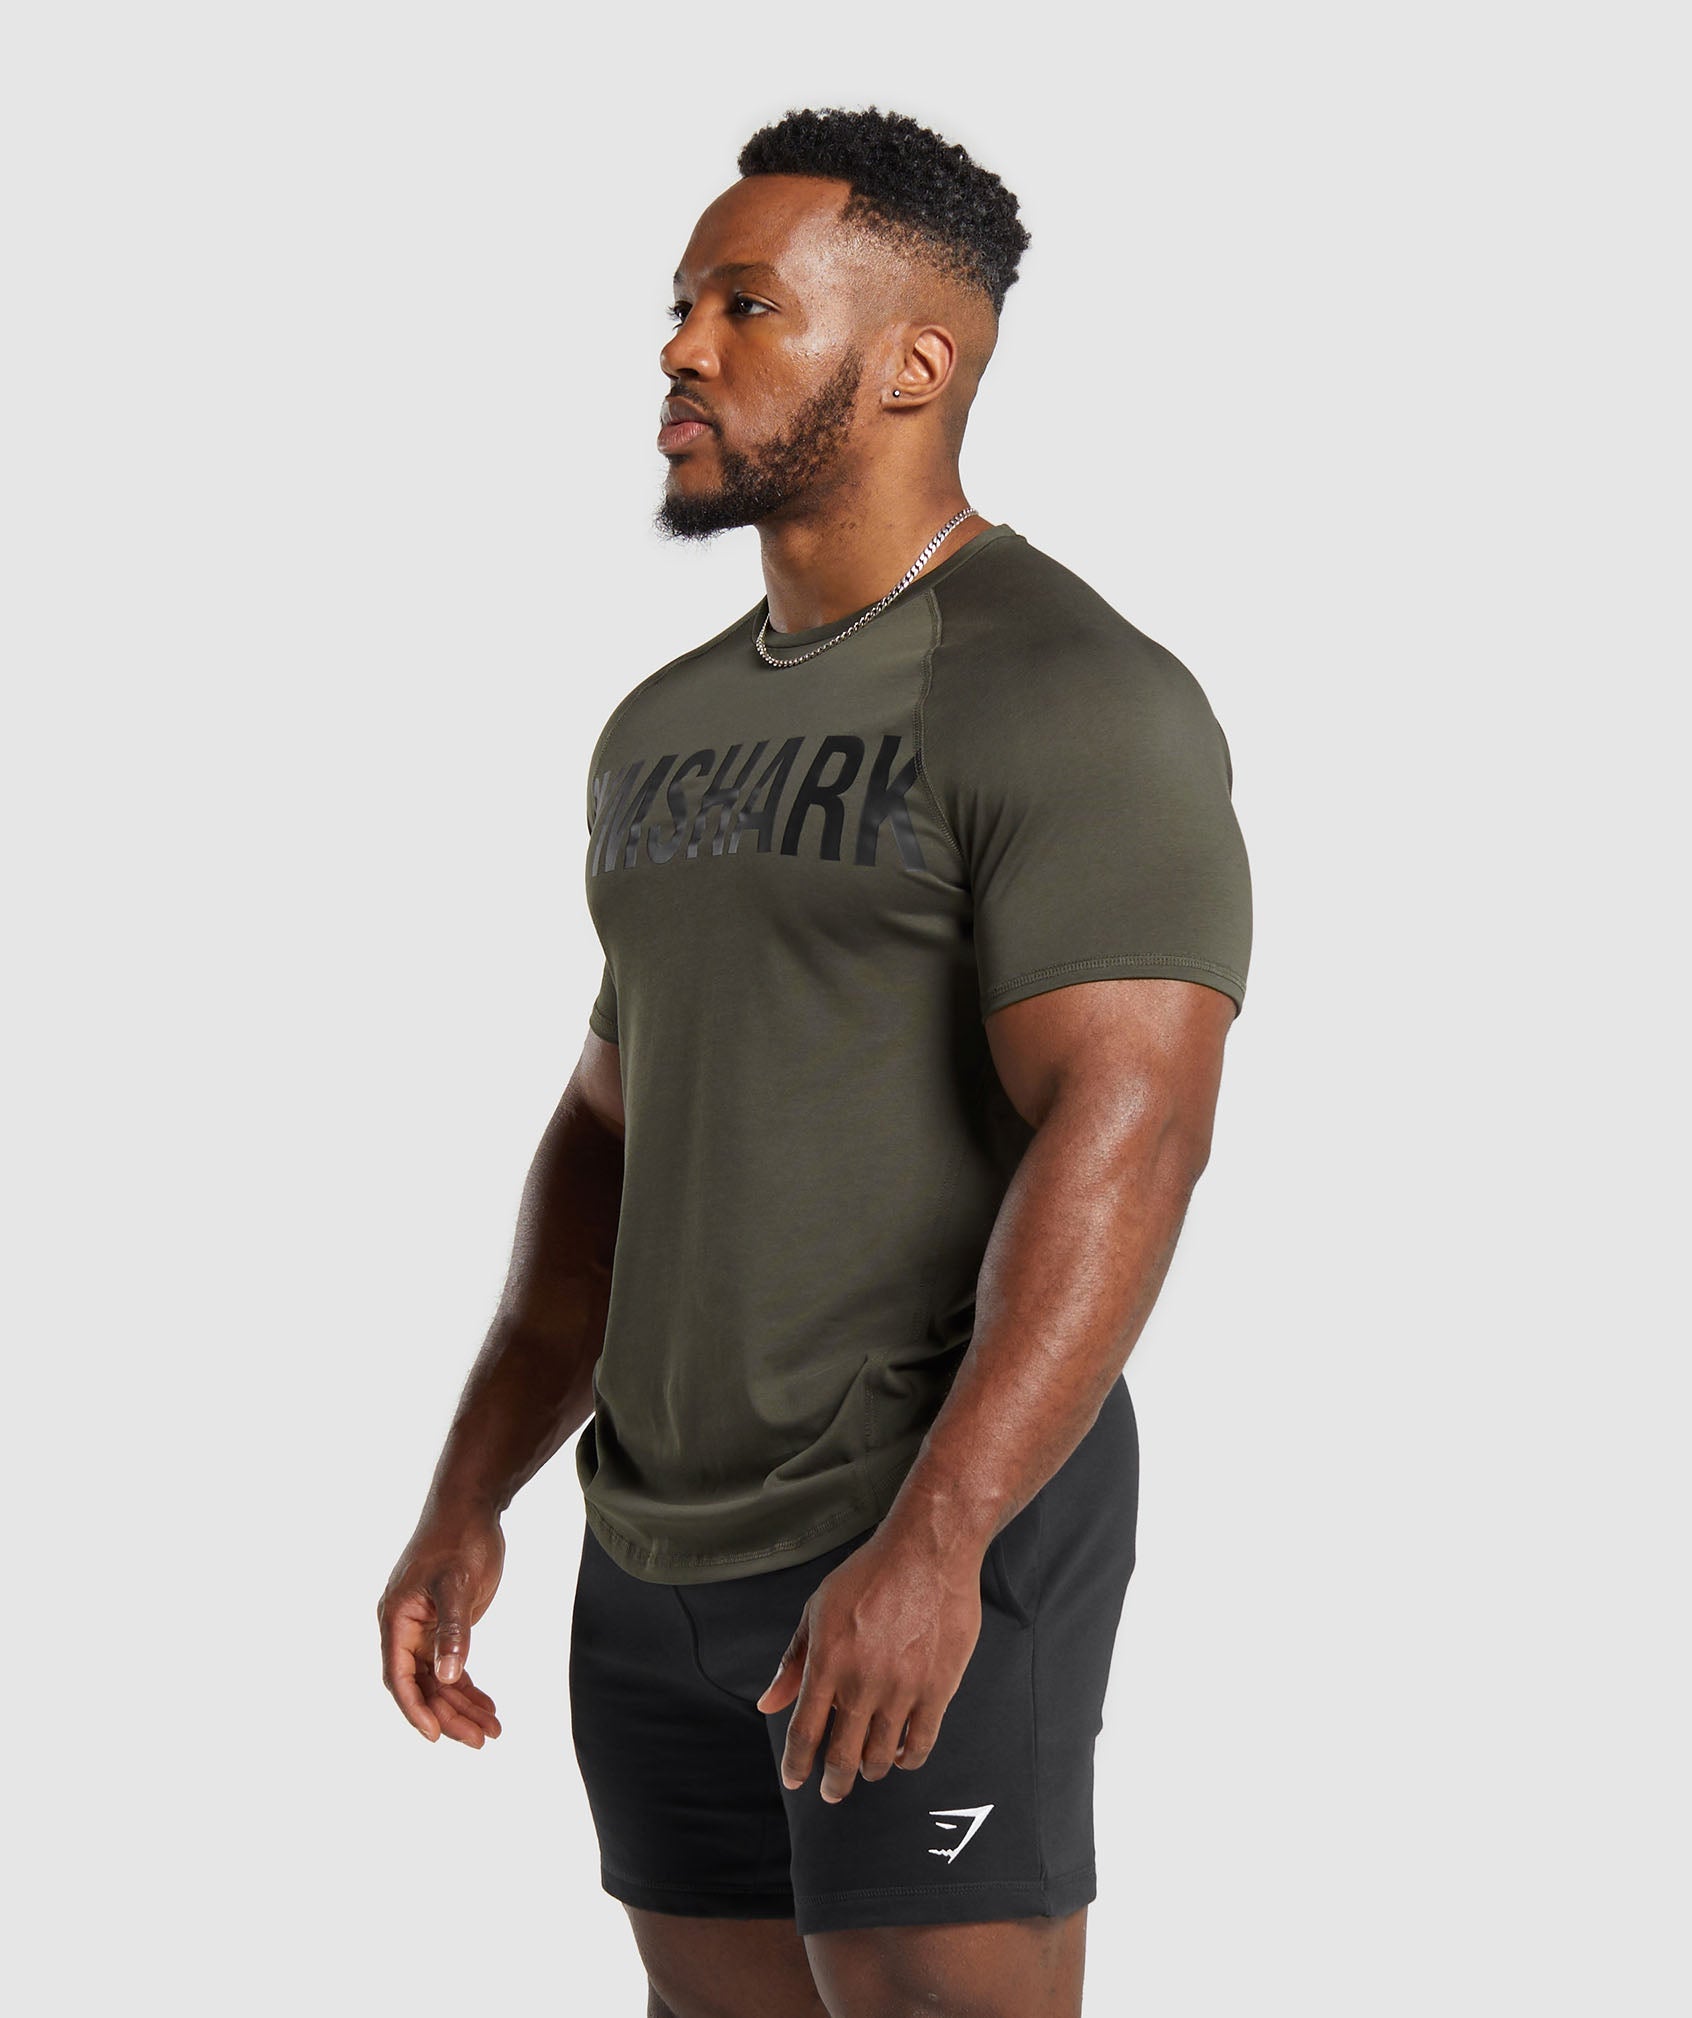 Impact T-Shirt in Strength Green - view 3